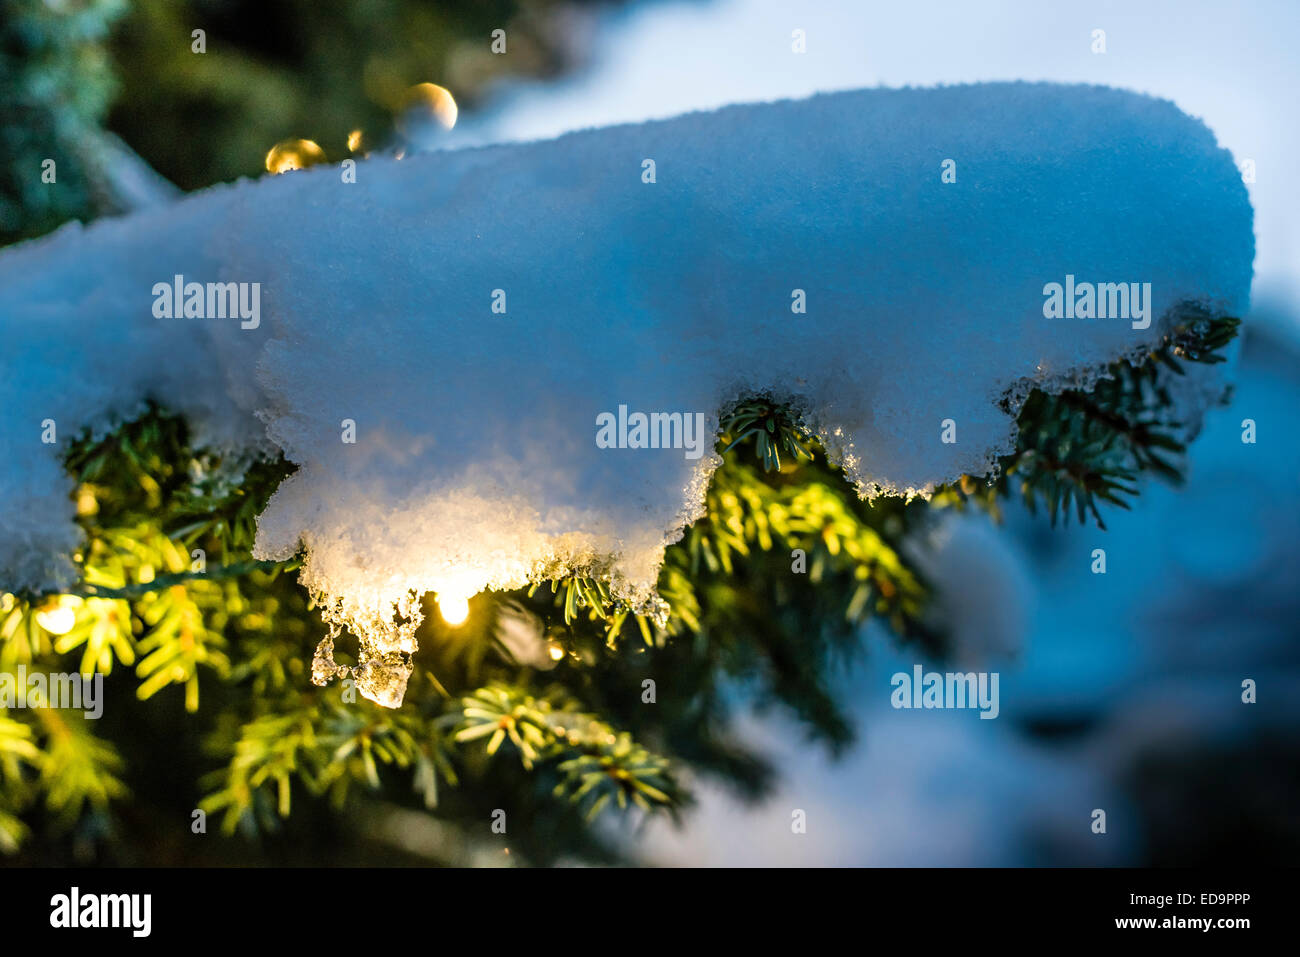 Festively decorated Christmas fir tree outside in the snow. Snow covered branches, warm lights, cold background. Stock Photo